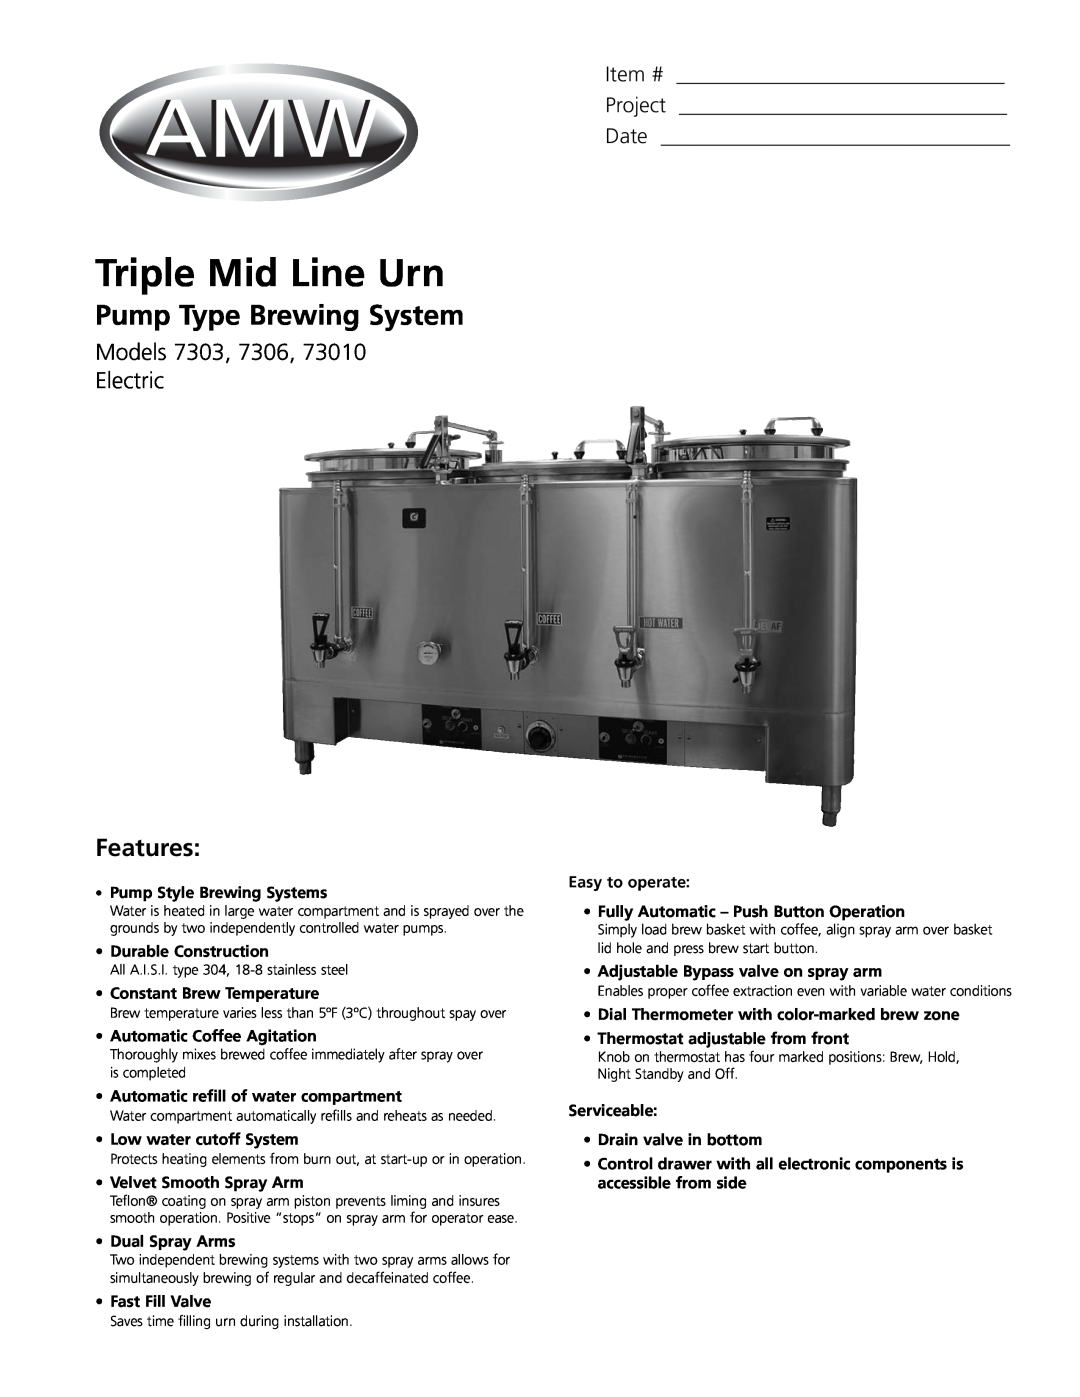 Grindmaster manual Triple Mid Line Urn, Pump Type Brewing System, Features, Models 7303, 7306, Electric, Item #, Date 